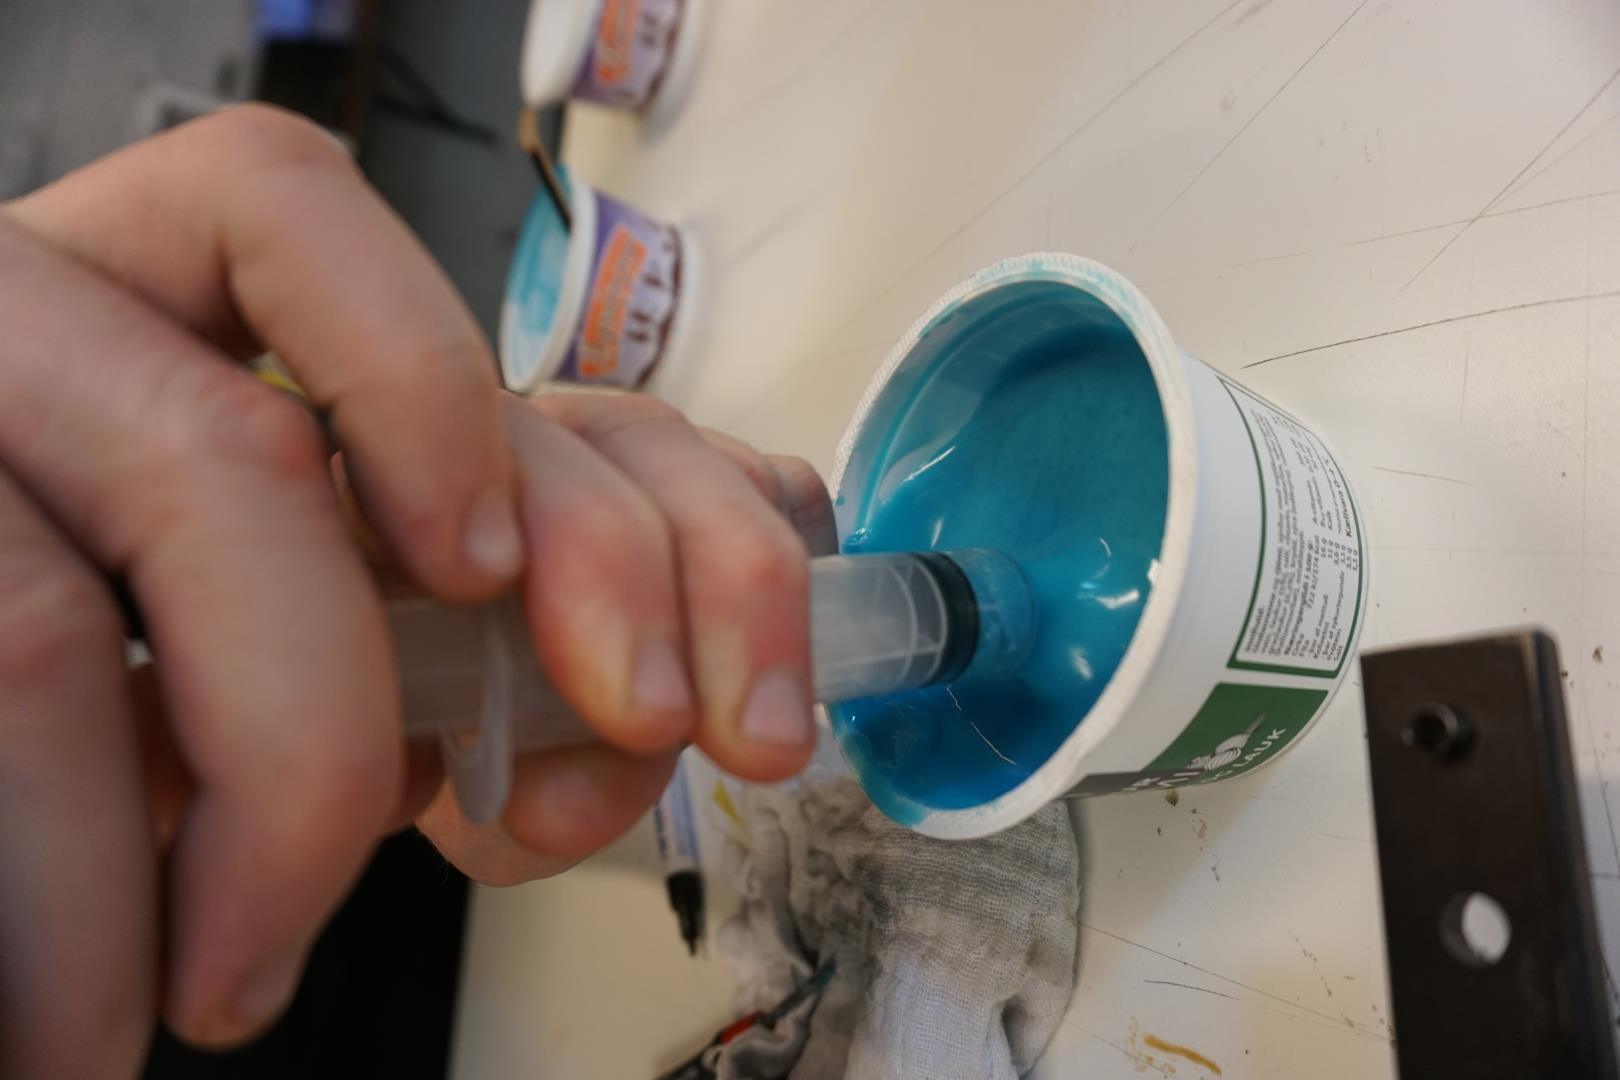 Drawing silicone into the syringe